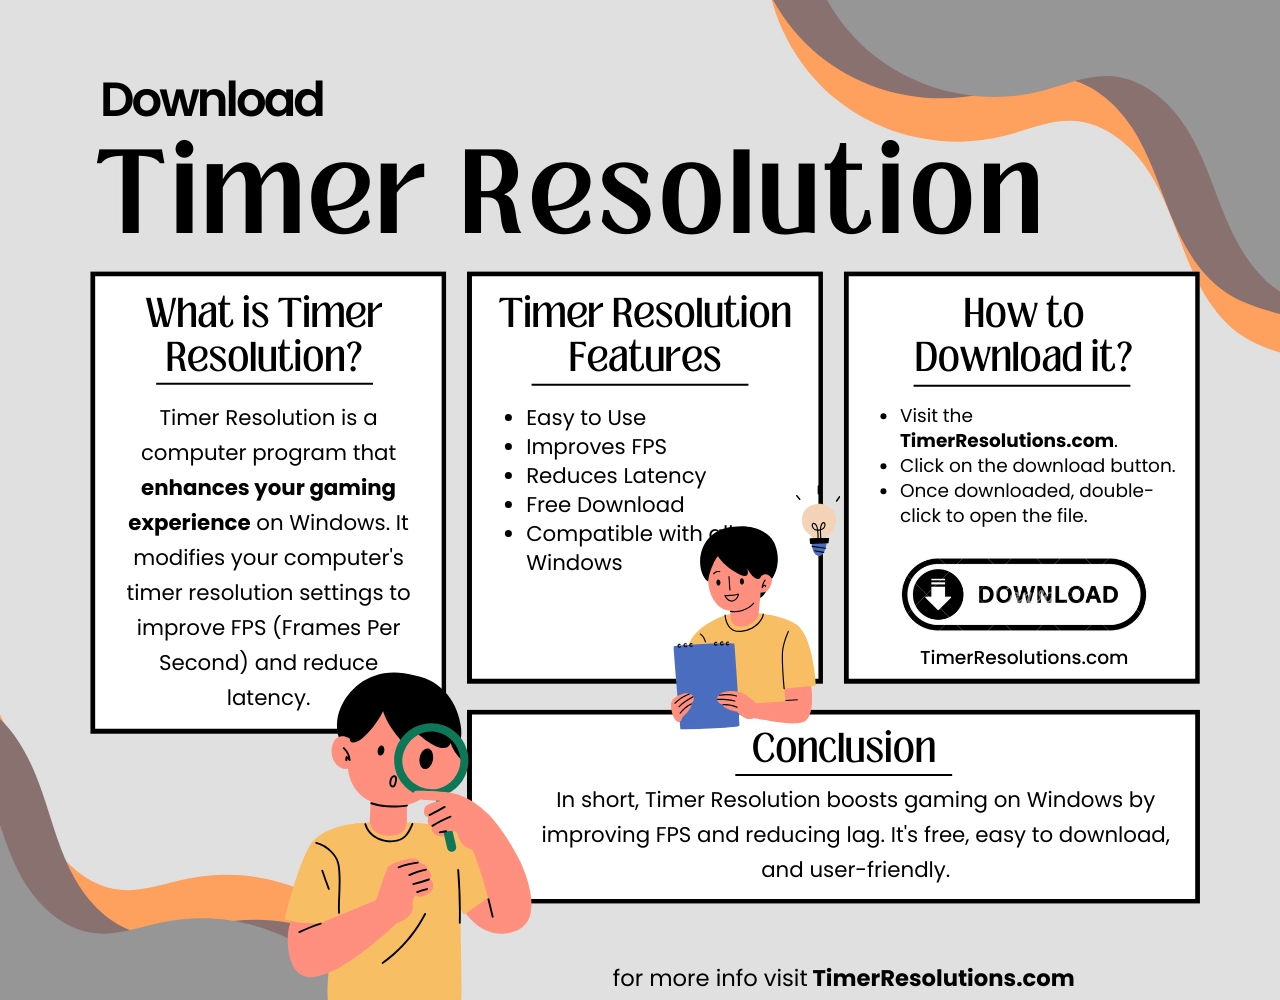 Download Timer Resolution on Windows for Free